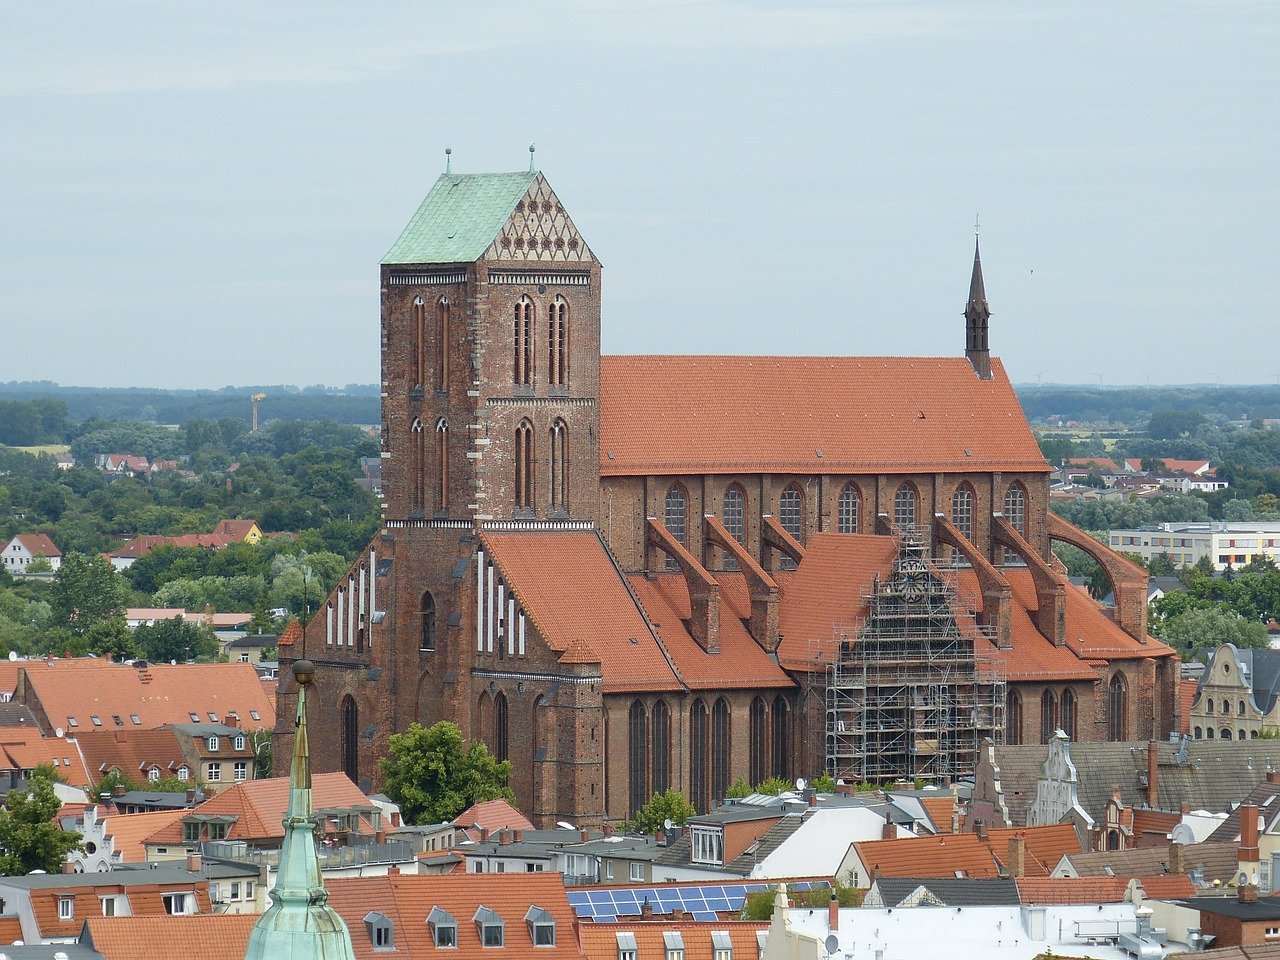 The St. Nicholas’ church,Wismar, Cities in Germany